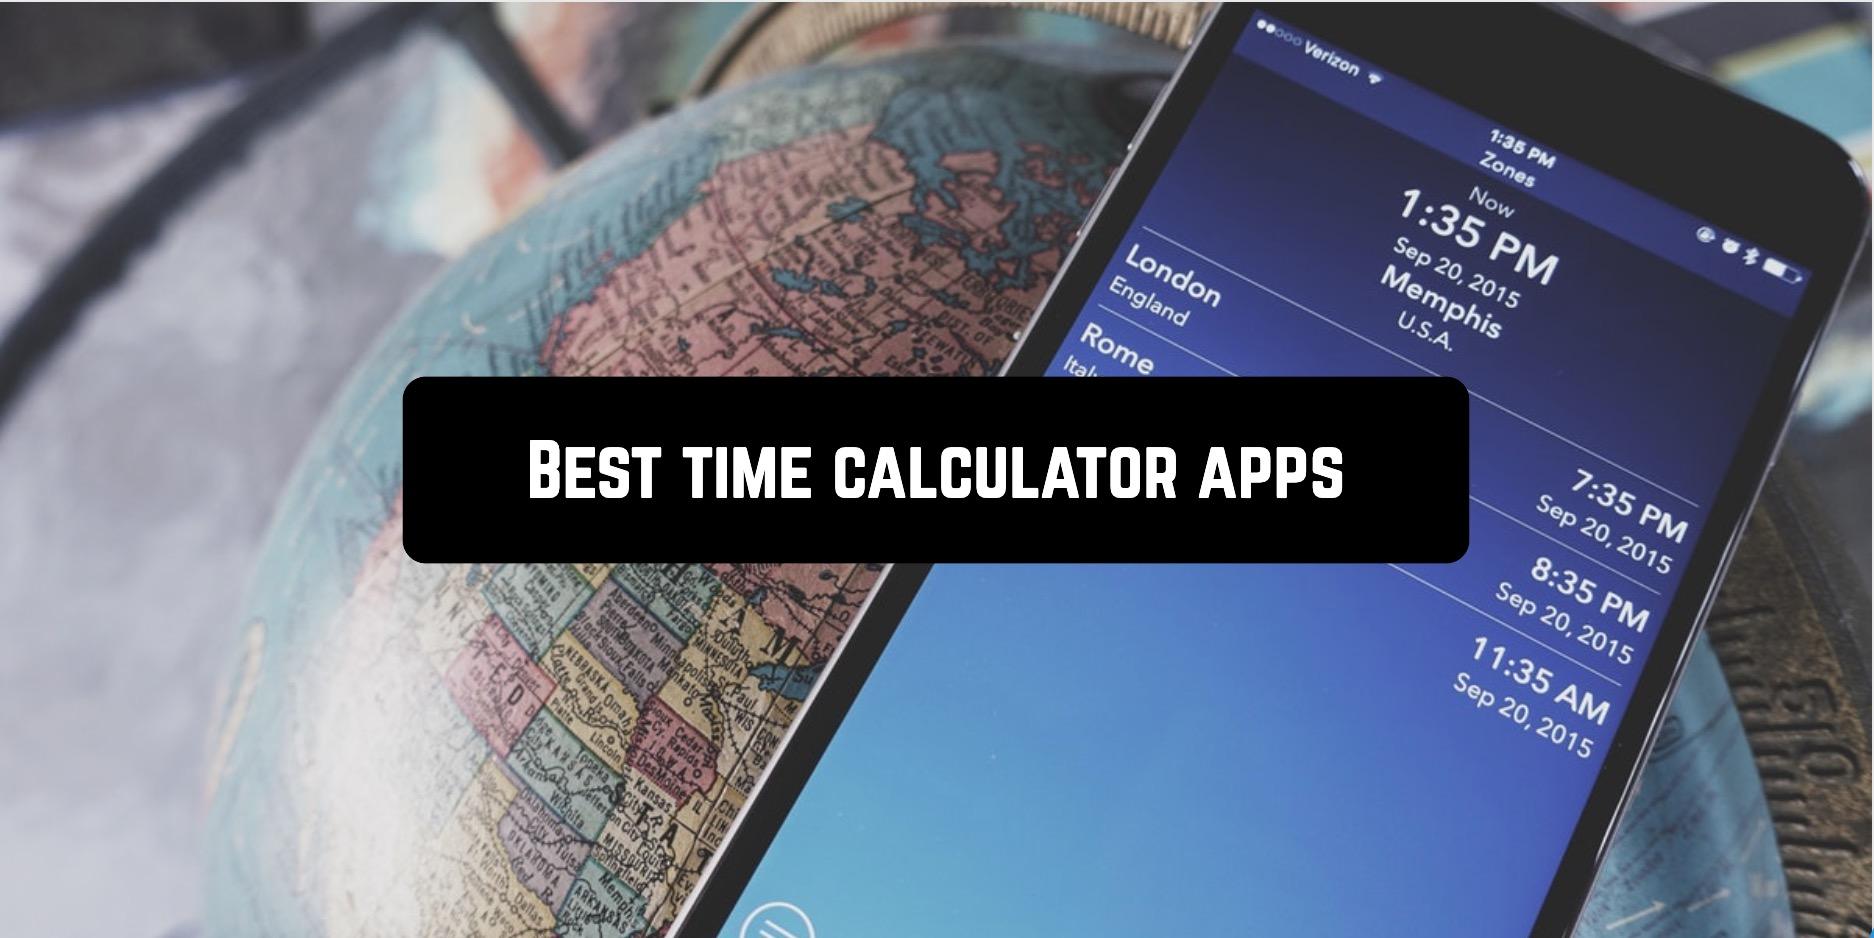 11 Best Time Calculator Apps For Android Android Apps For Me